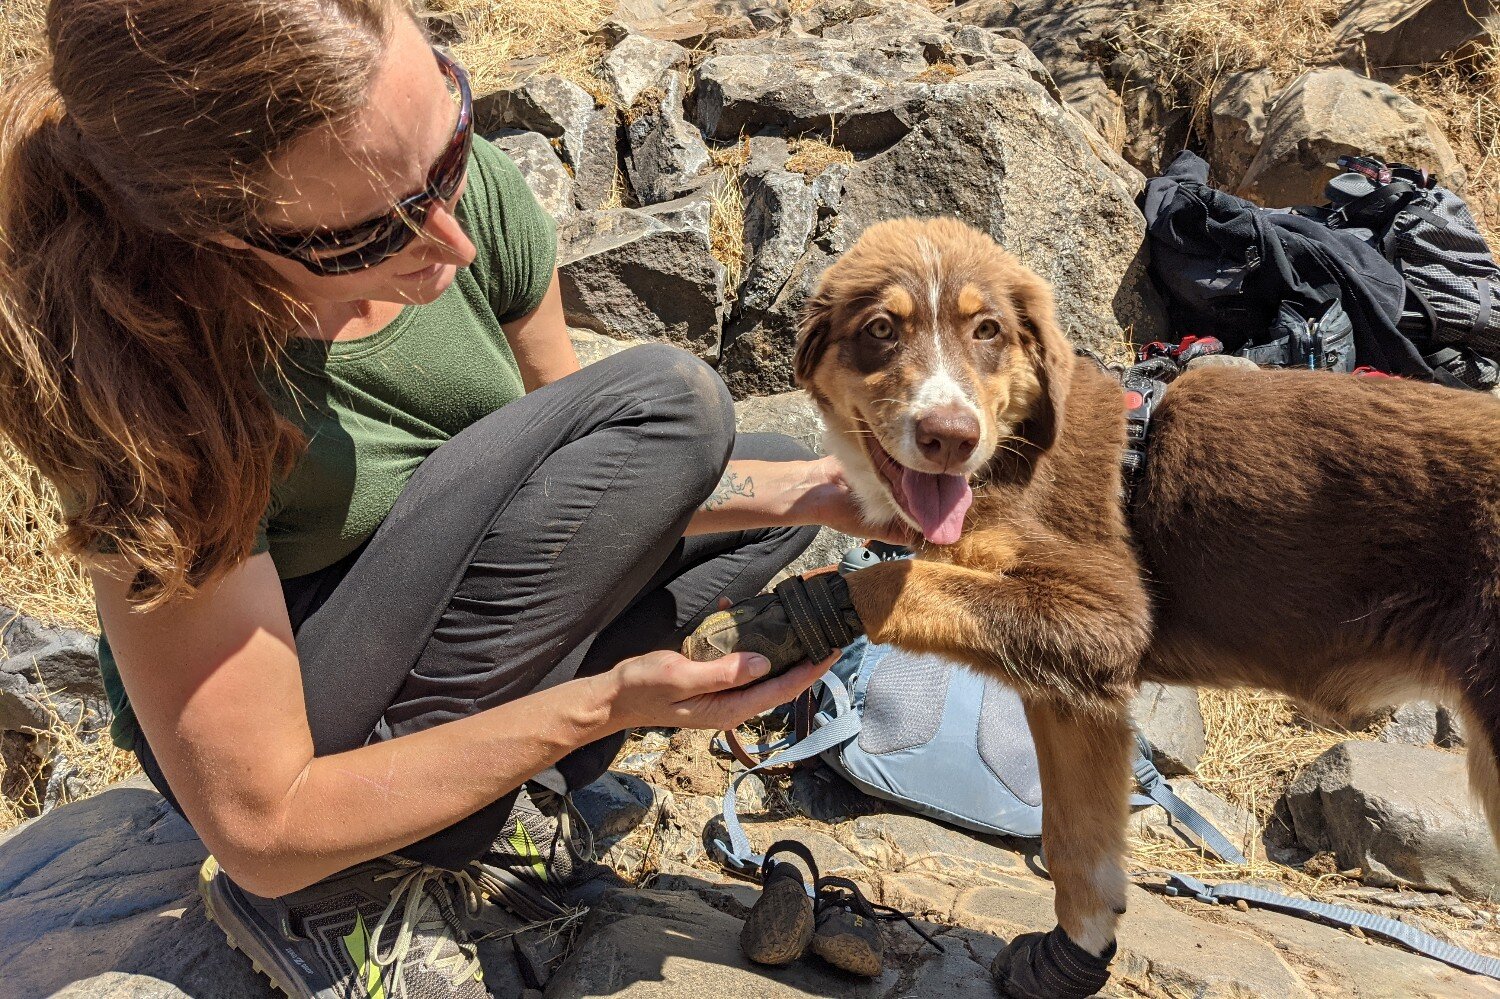 among Danube Prominent 5 Best Dog Boots of 2023 — CleverHiker | Backpacking Gear Reviews & Tutorial